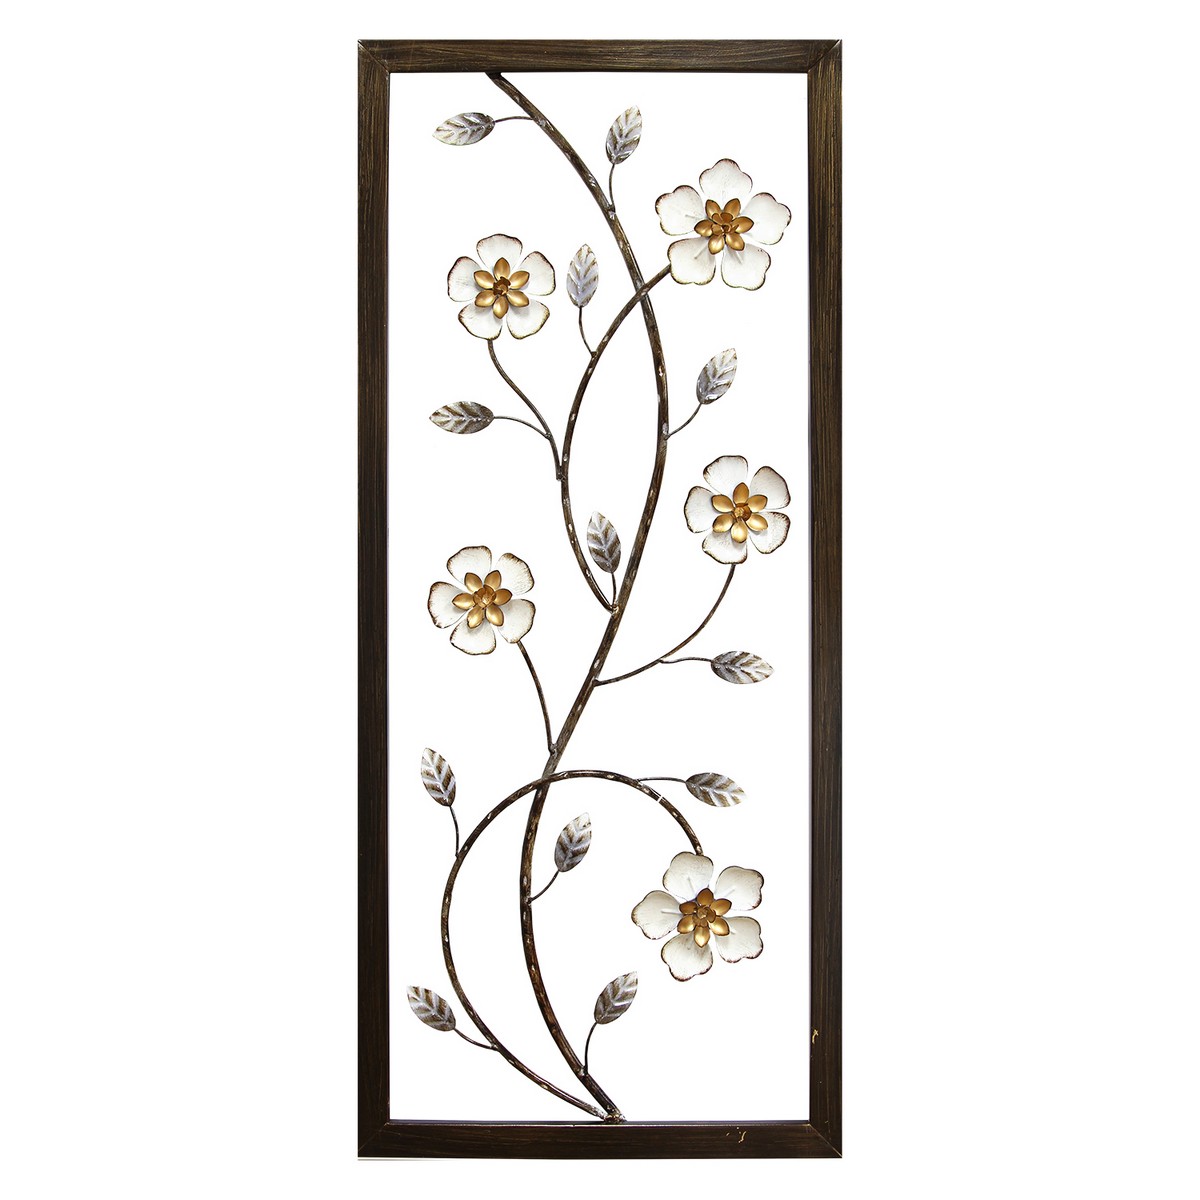 Stratton Home Decor White Blooming Floral Panel Wall Decor - White and Black